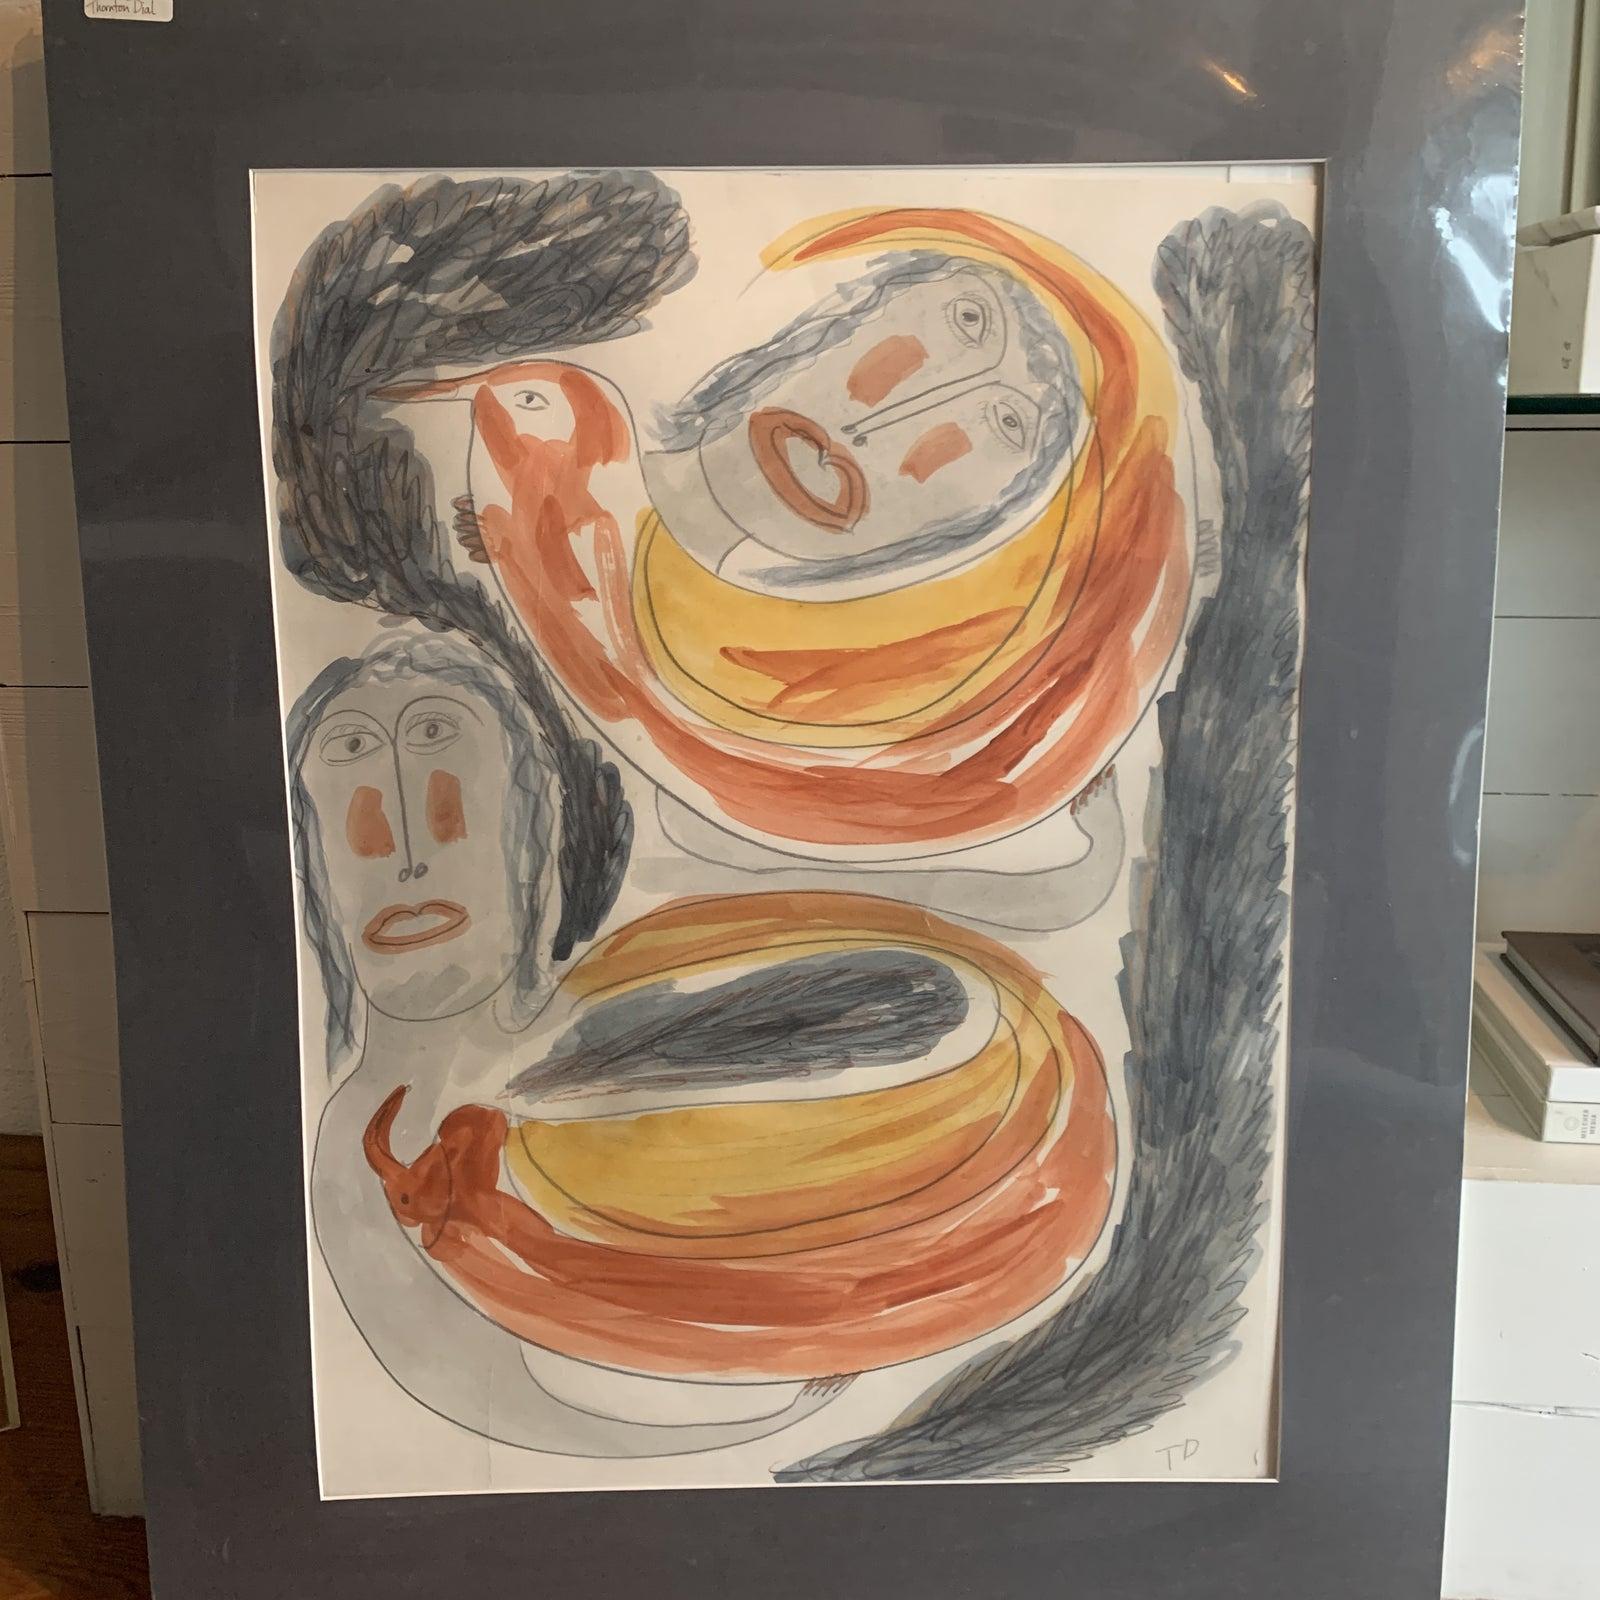 Rare works on paper by famous artist Thornton Dial. Comes Unframed in its original grey linen matte and plastic cover. The piece has not been unpackaged since the 90’s
Wonderful for the serious art collector and lover! Artist: Thornton Dial ,